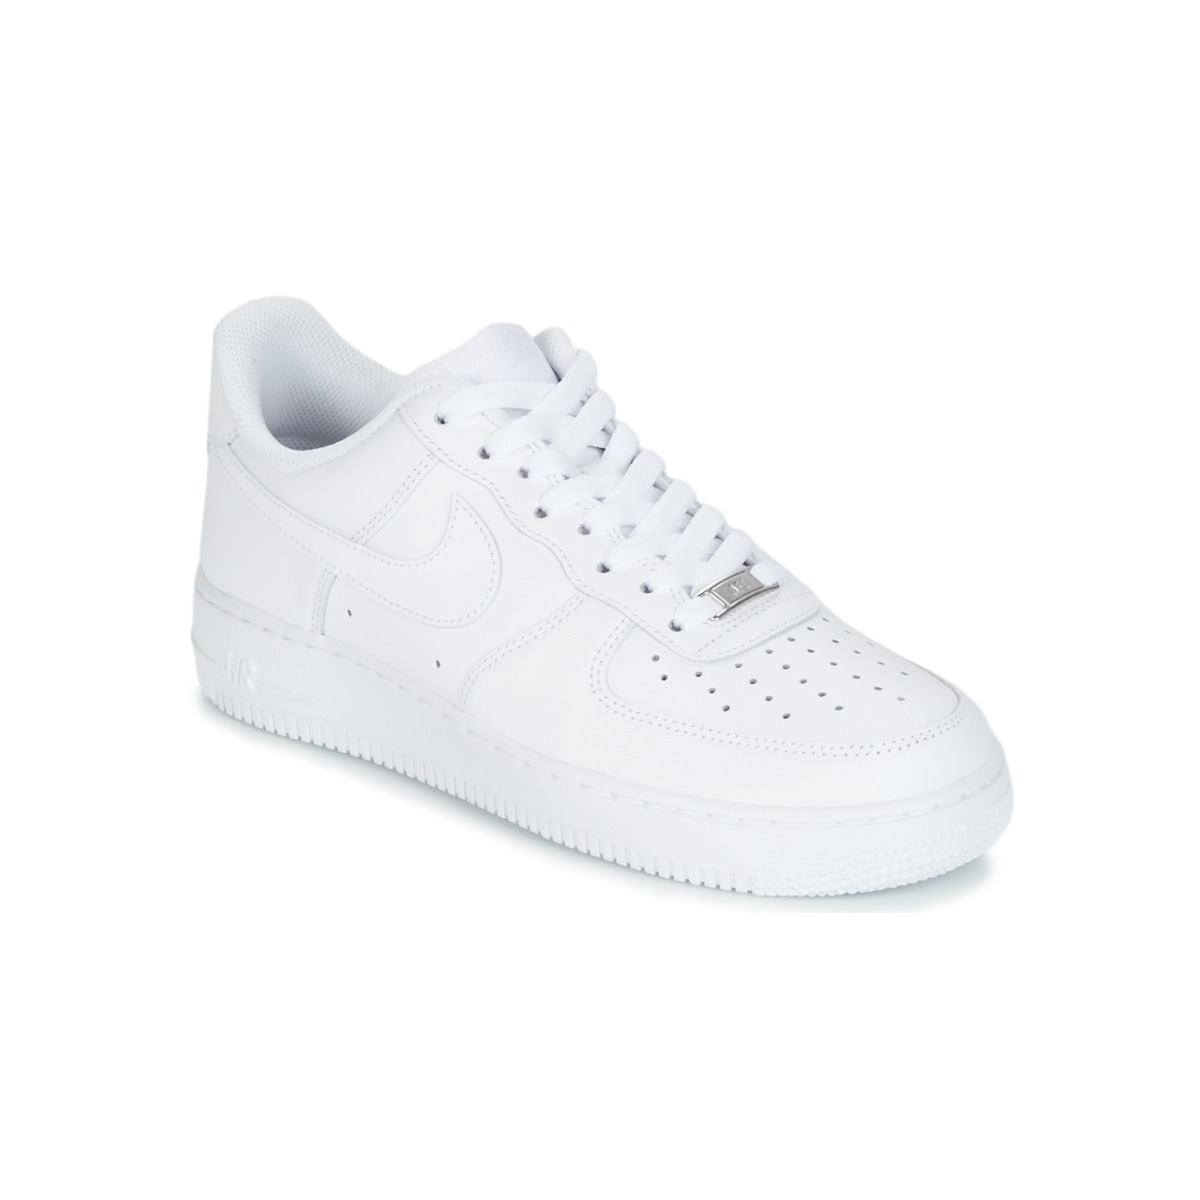 Chaussures Homme Baskets basses Nike AIR FORCE 1 07 Blanc